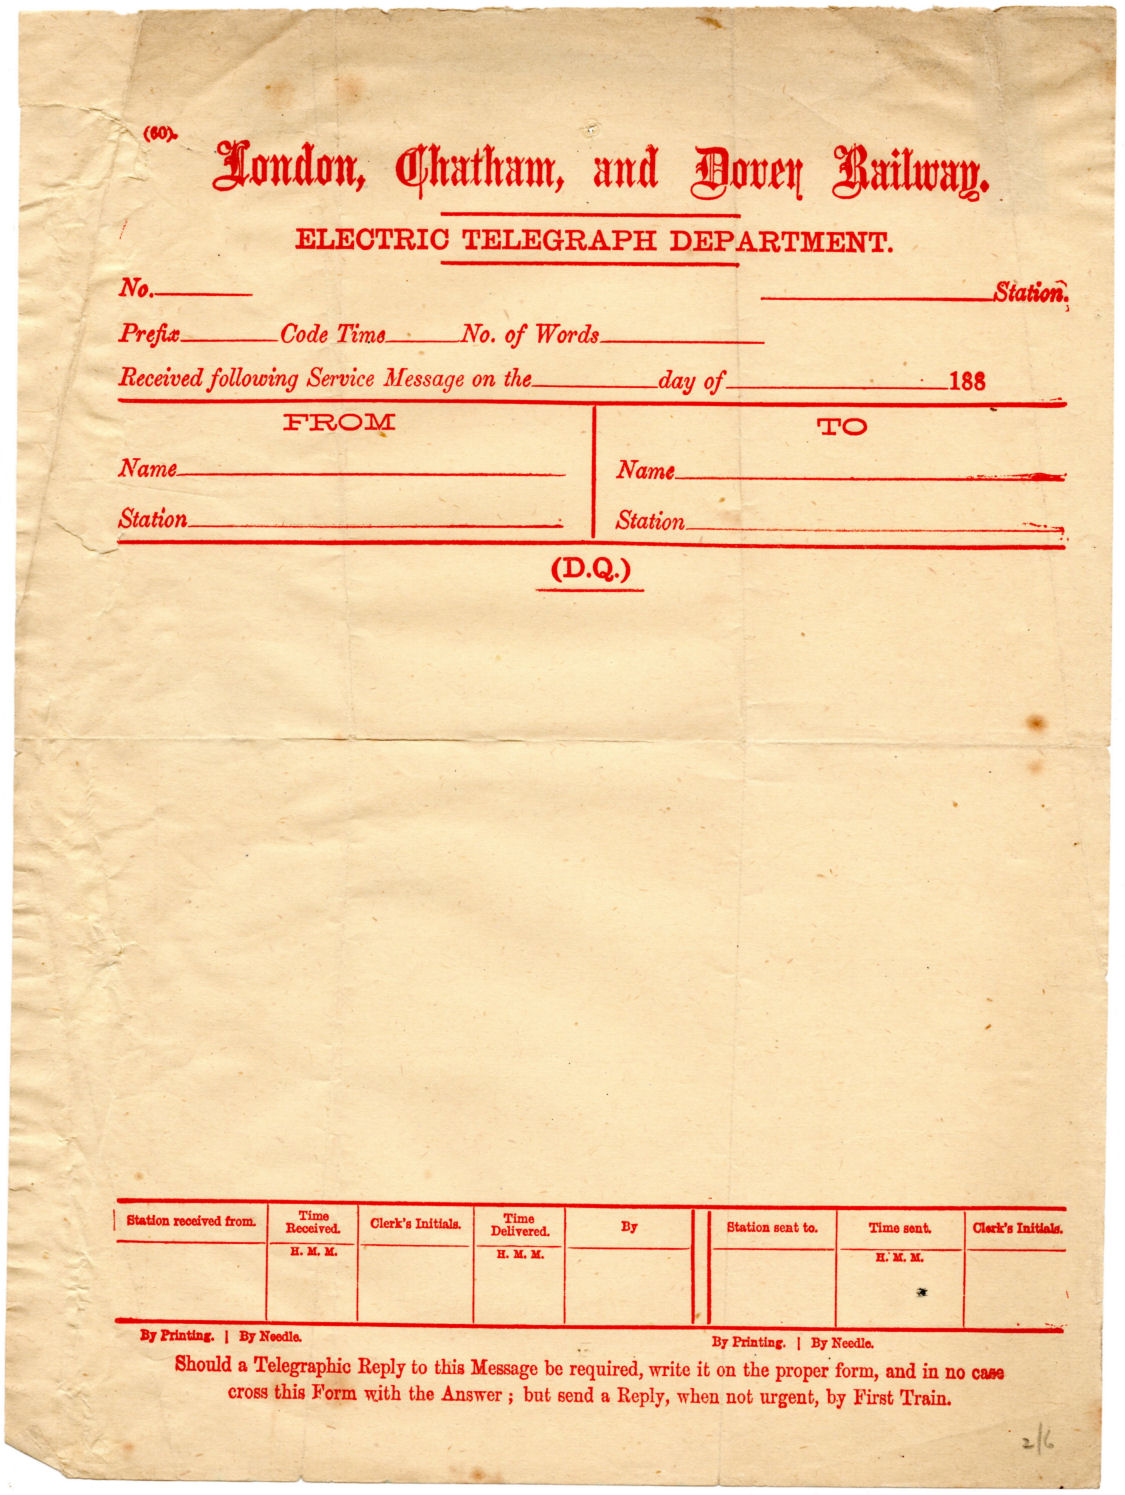 LCDR unused Form 60.